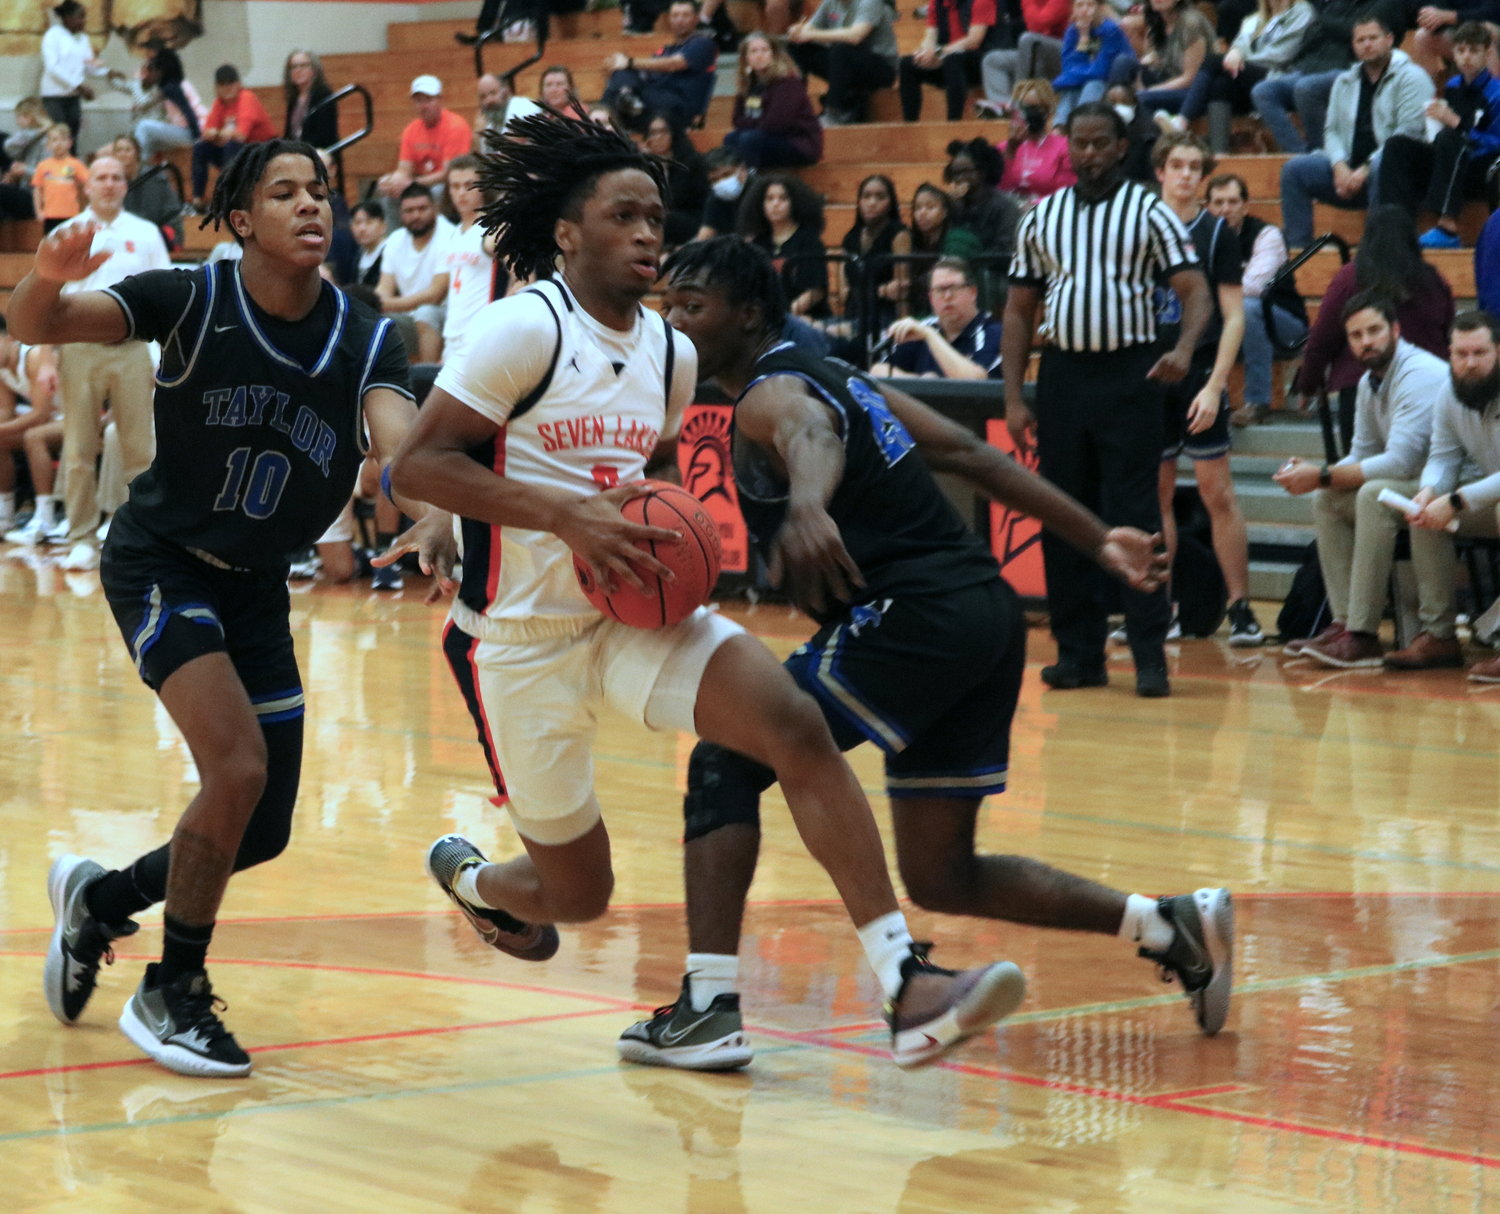 Tahaad Davis drives through the lane during Wednesday’s game between Seven Lakes and Taylor at the Seven Lakes gym.